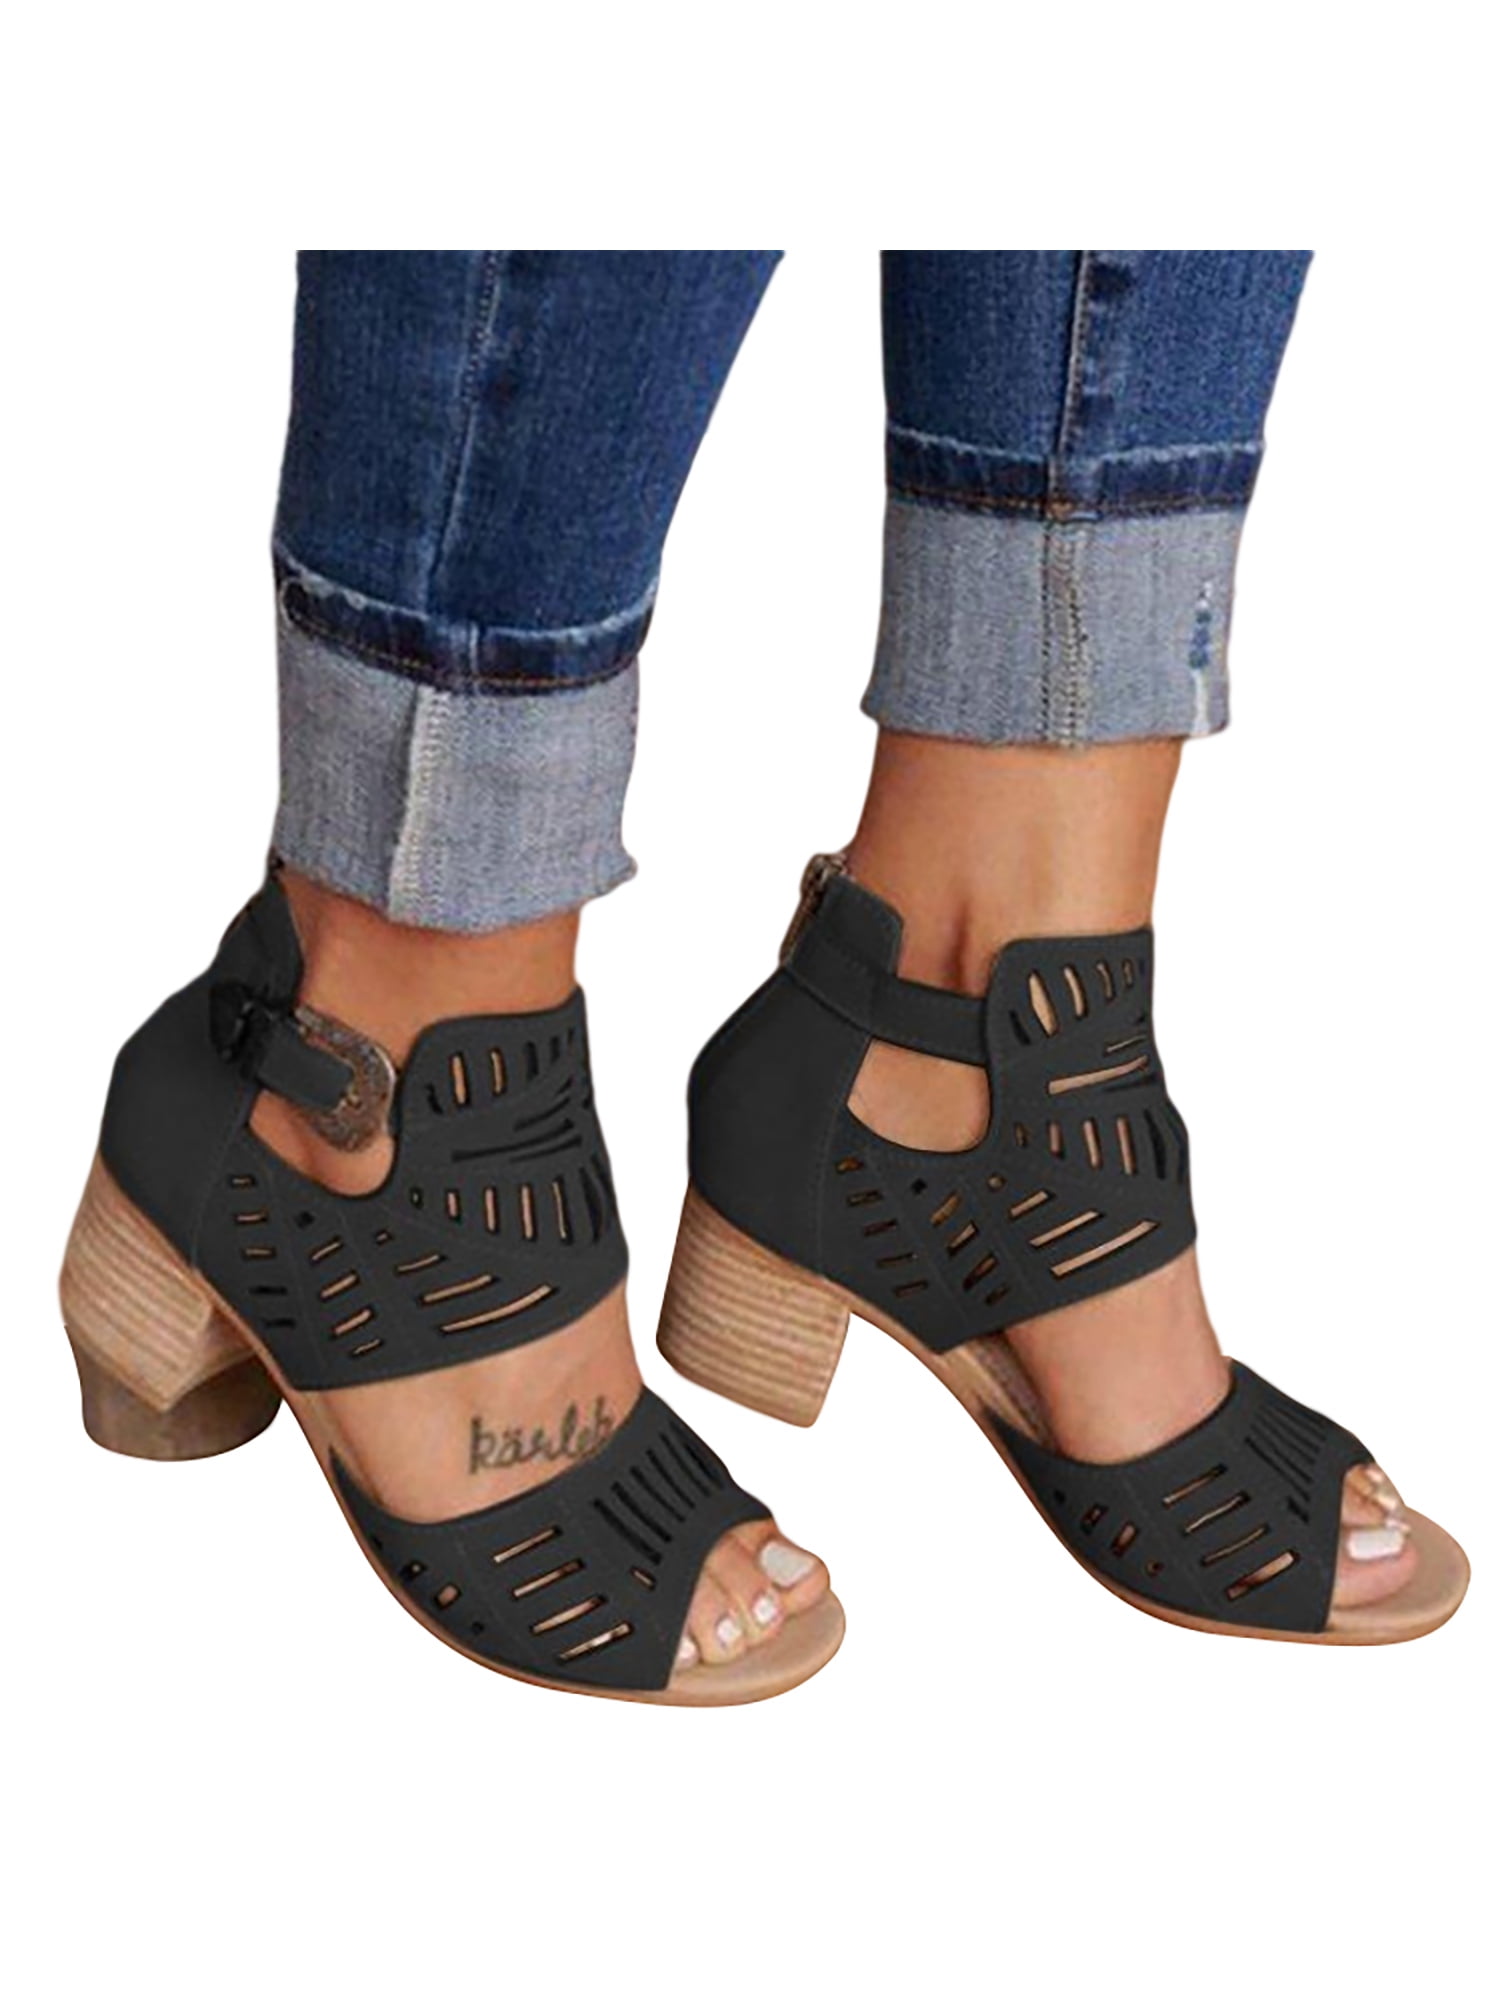 Womens Ladies Low mid Block Heel peep Toe Buckle Ankle Strap Party Strappy Sandals Shoes Size